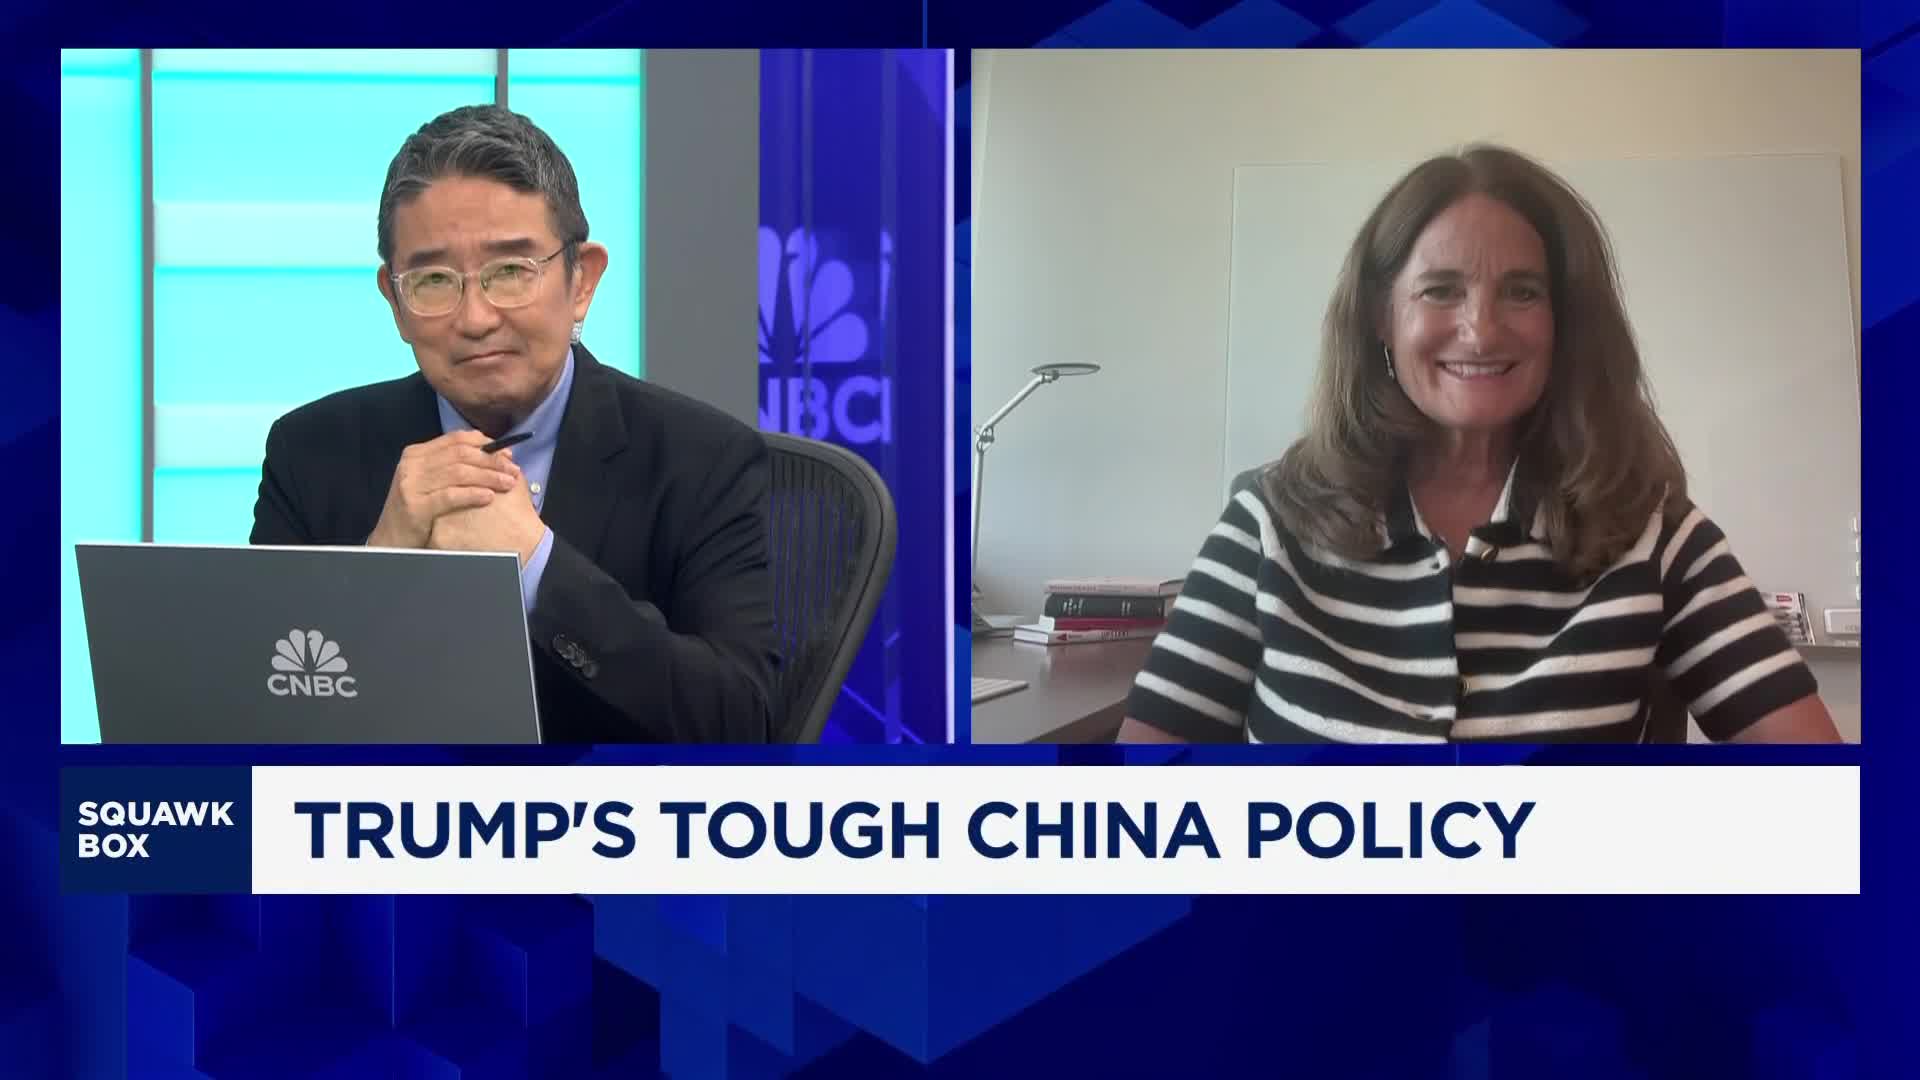 Analyst on outlook for U.S.-China relations in event of Trump 2.0 [Video]